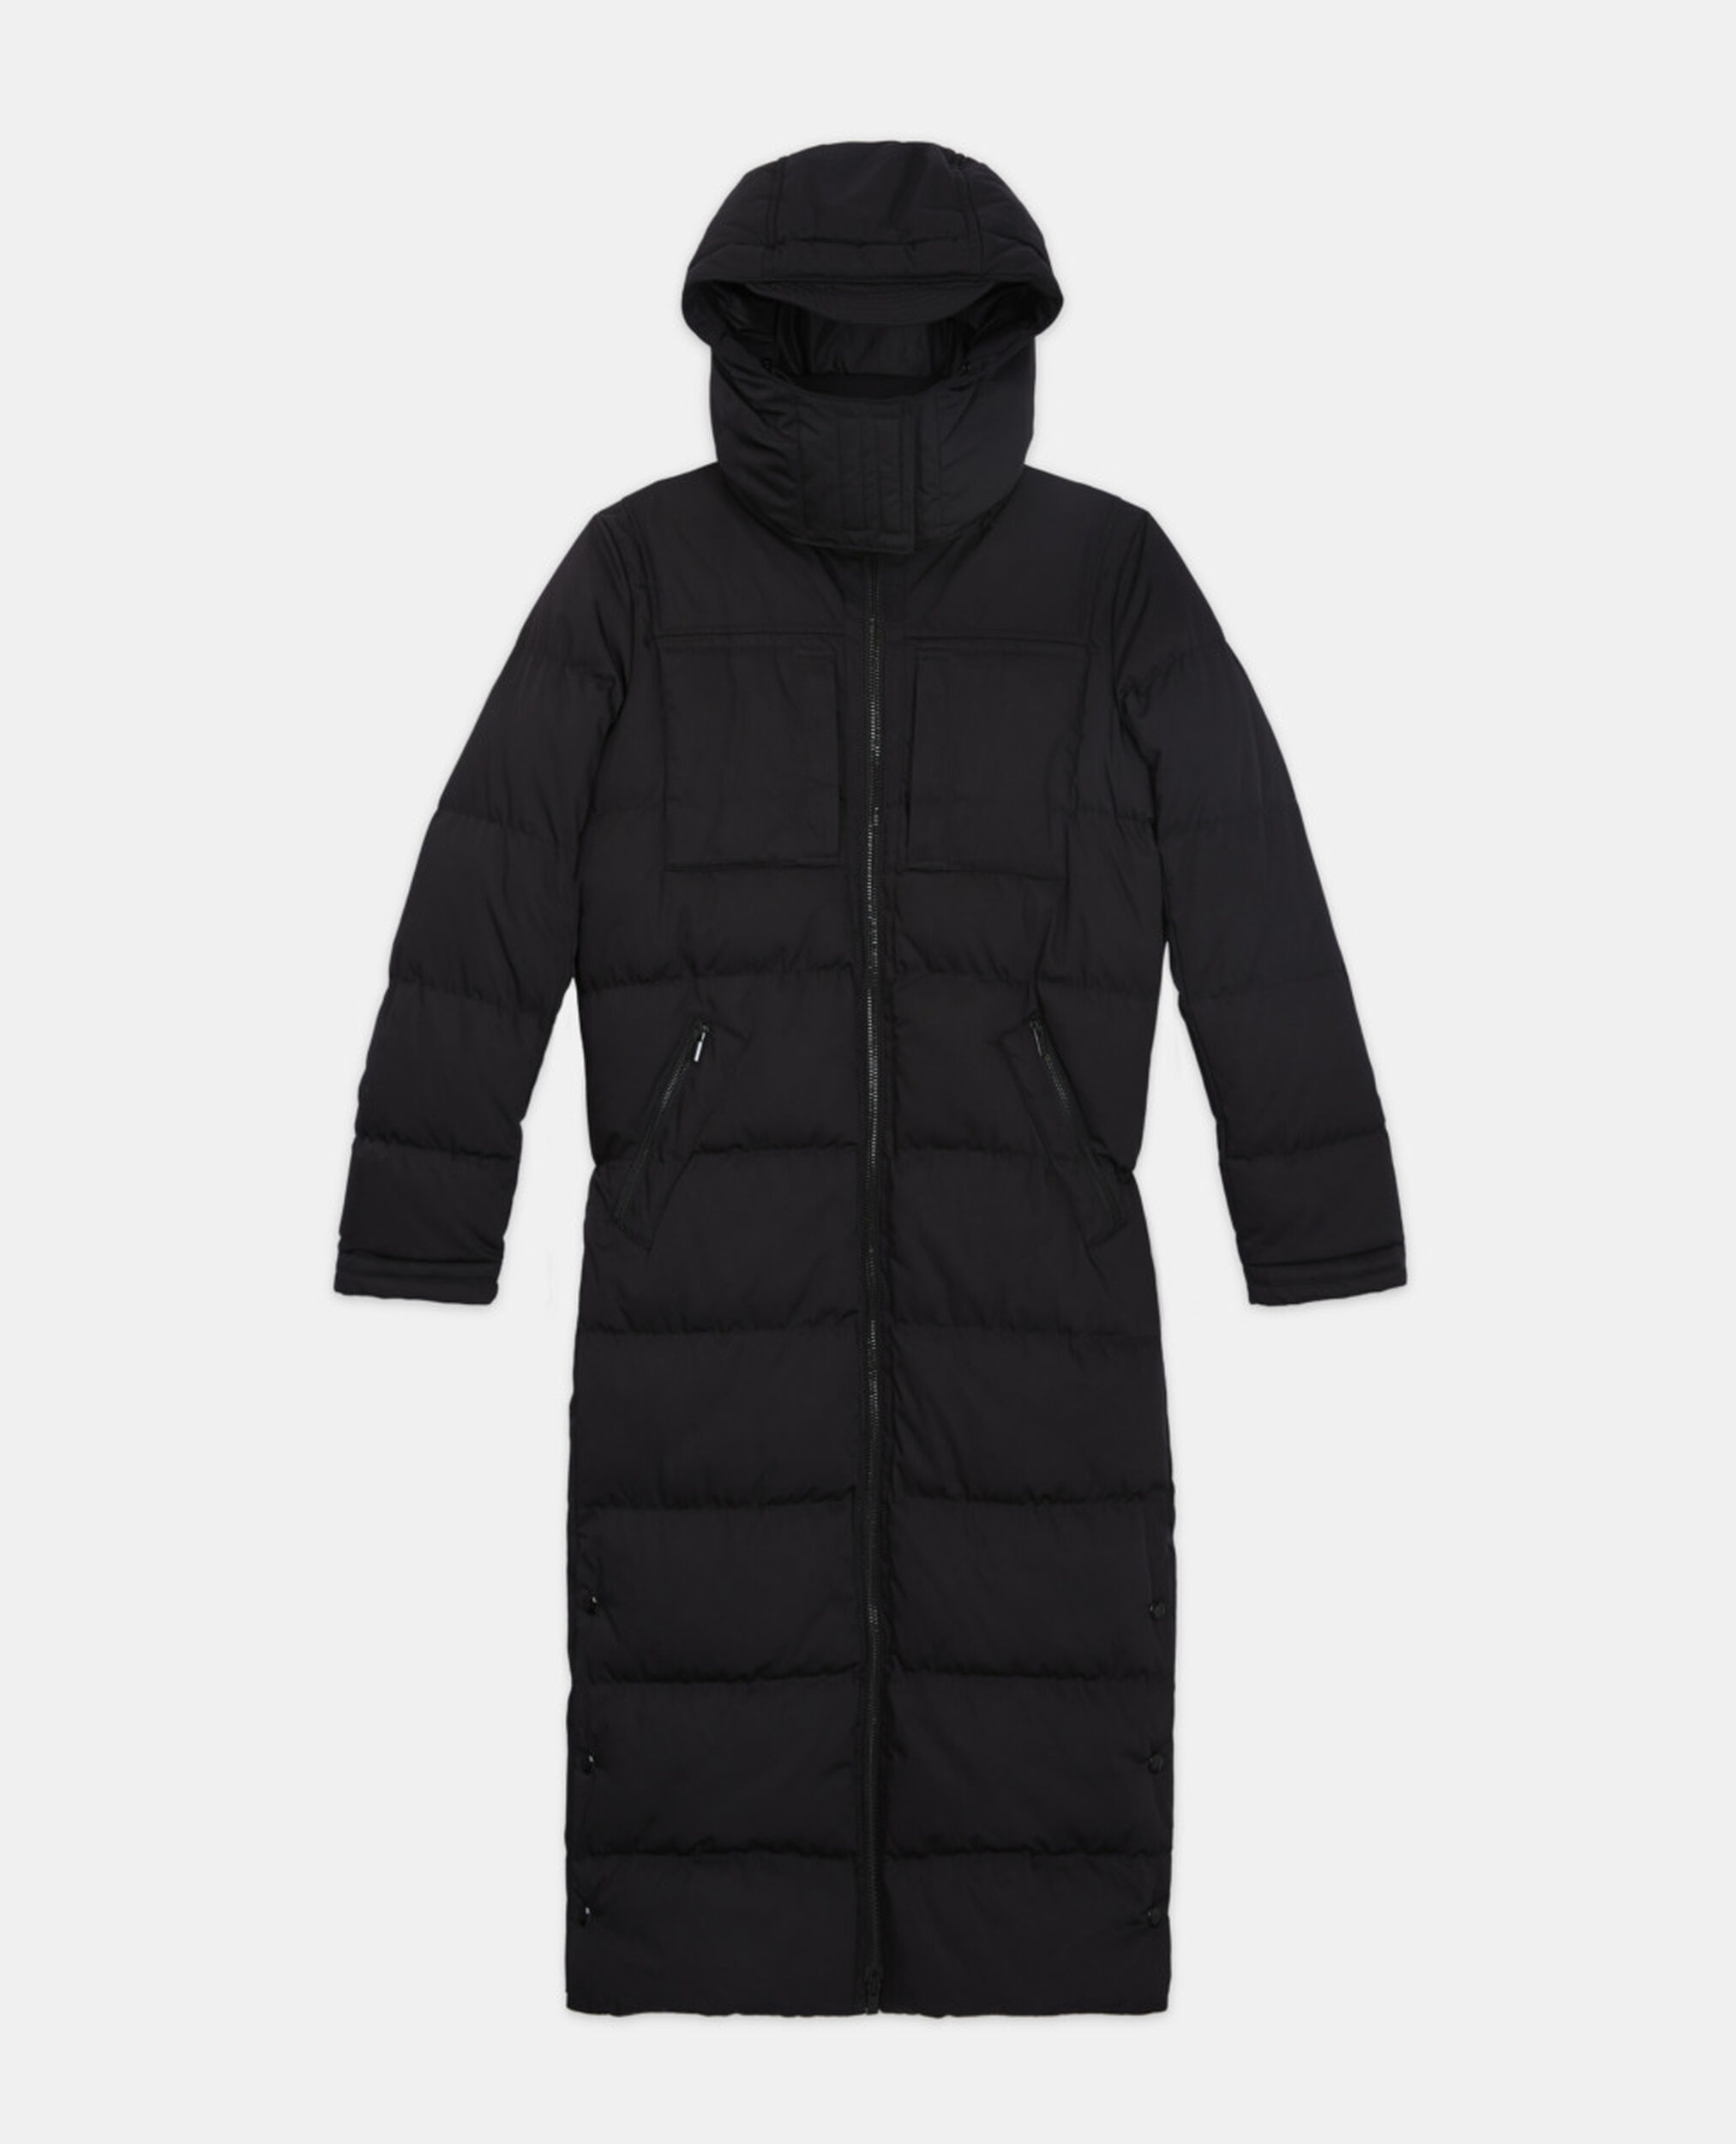 Long black down jacket with straps and logo, BLACK, hi-res image number null